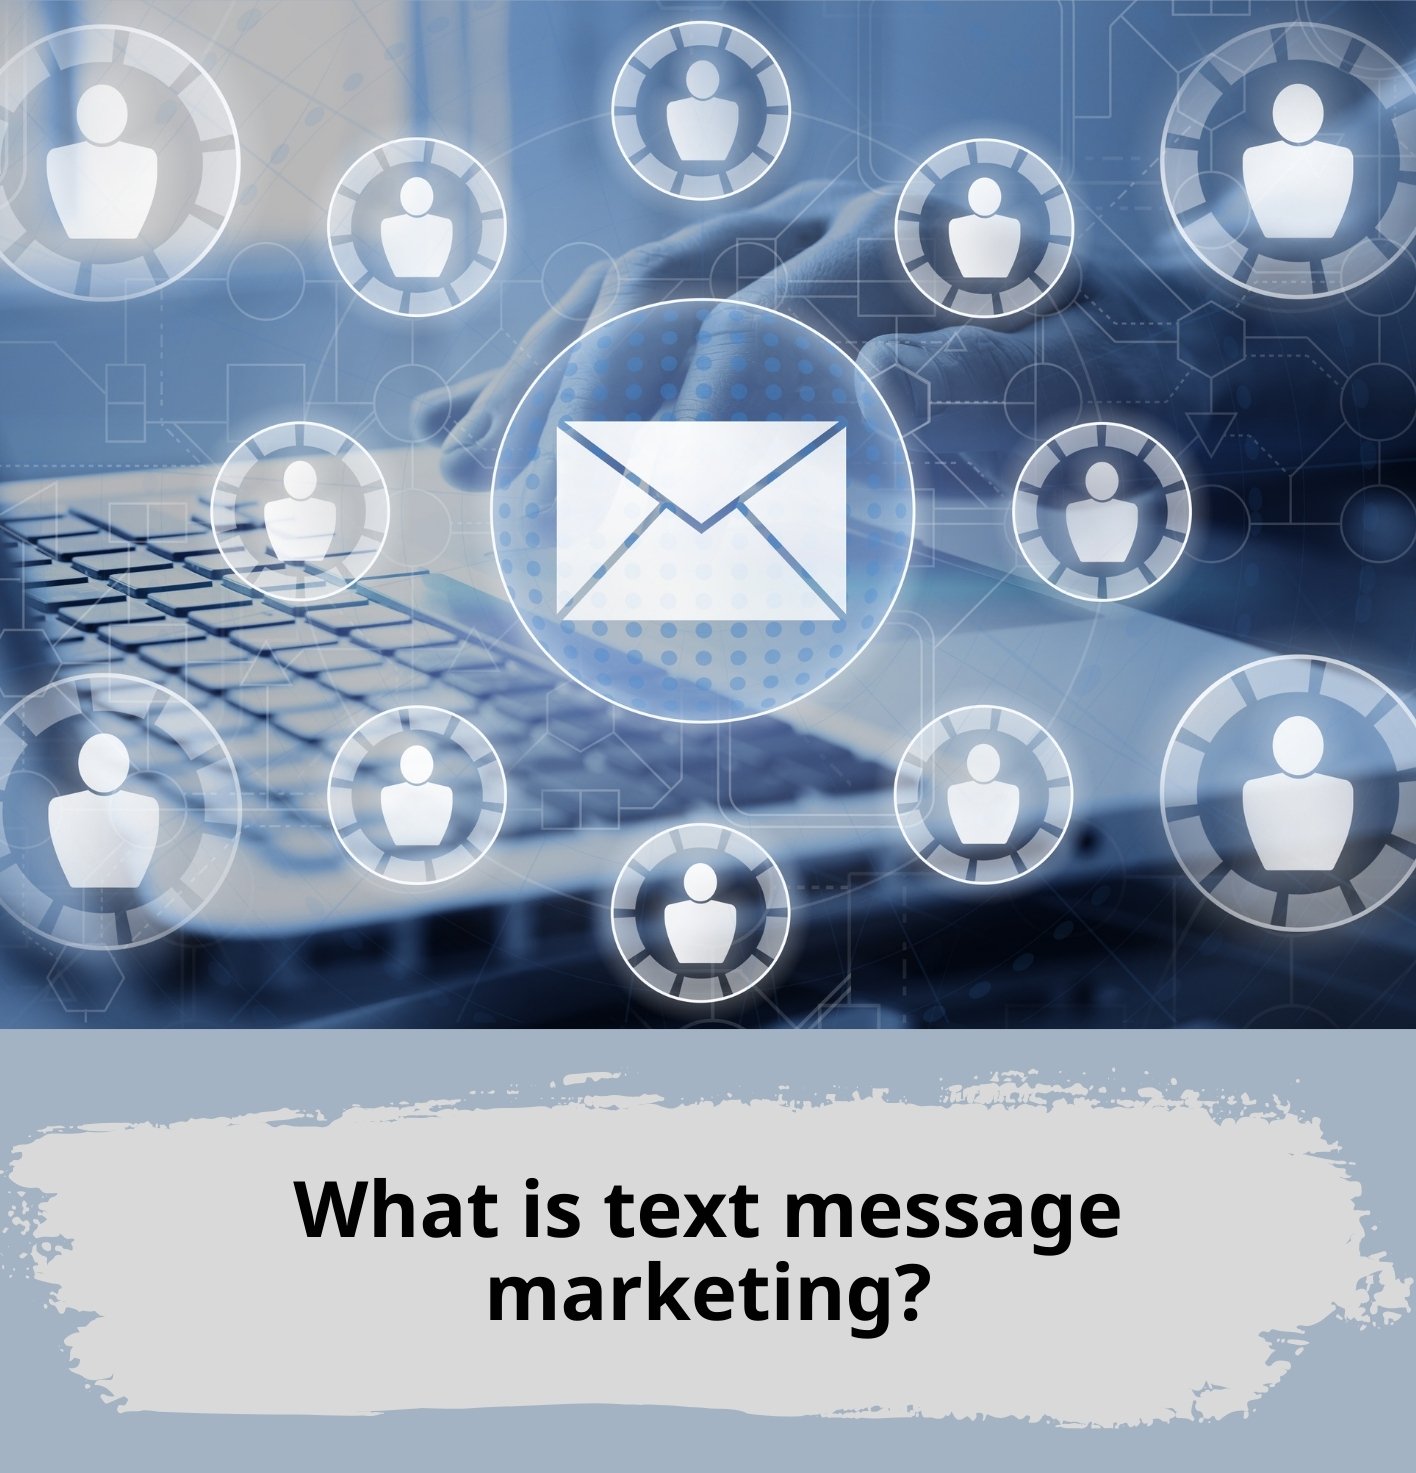 What is text message marketing?